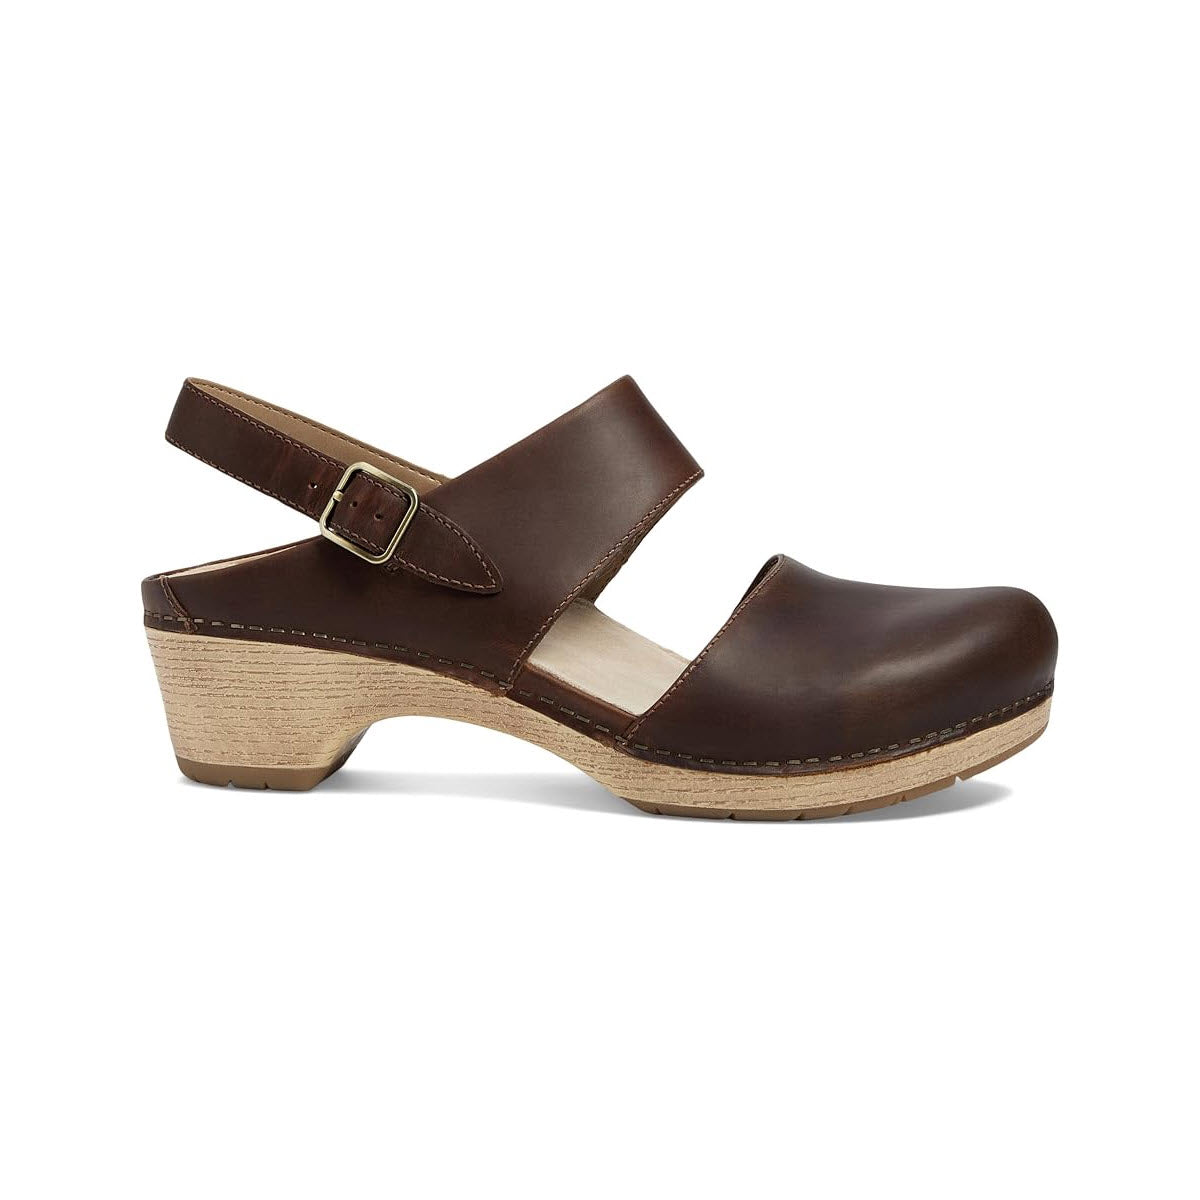 A brown leather closed-toe clog with a buckle strap, wooden heel, and stitched detailing, isolated on a white background is the Dansko Lucia Tan - Womens.